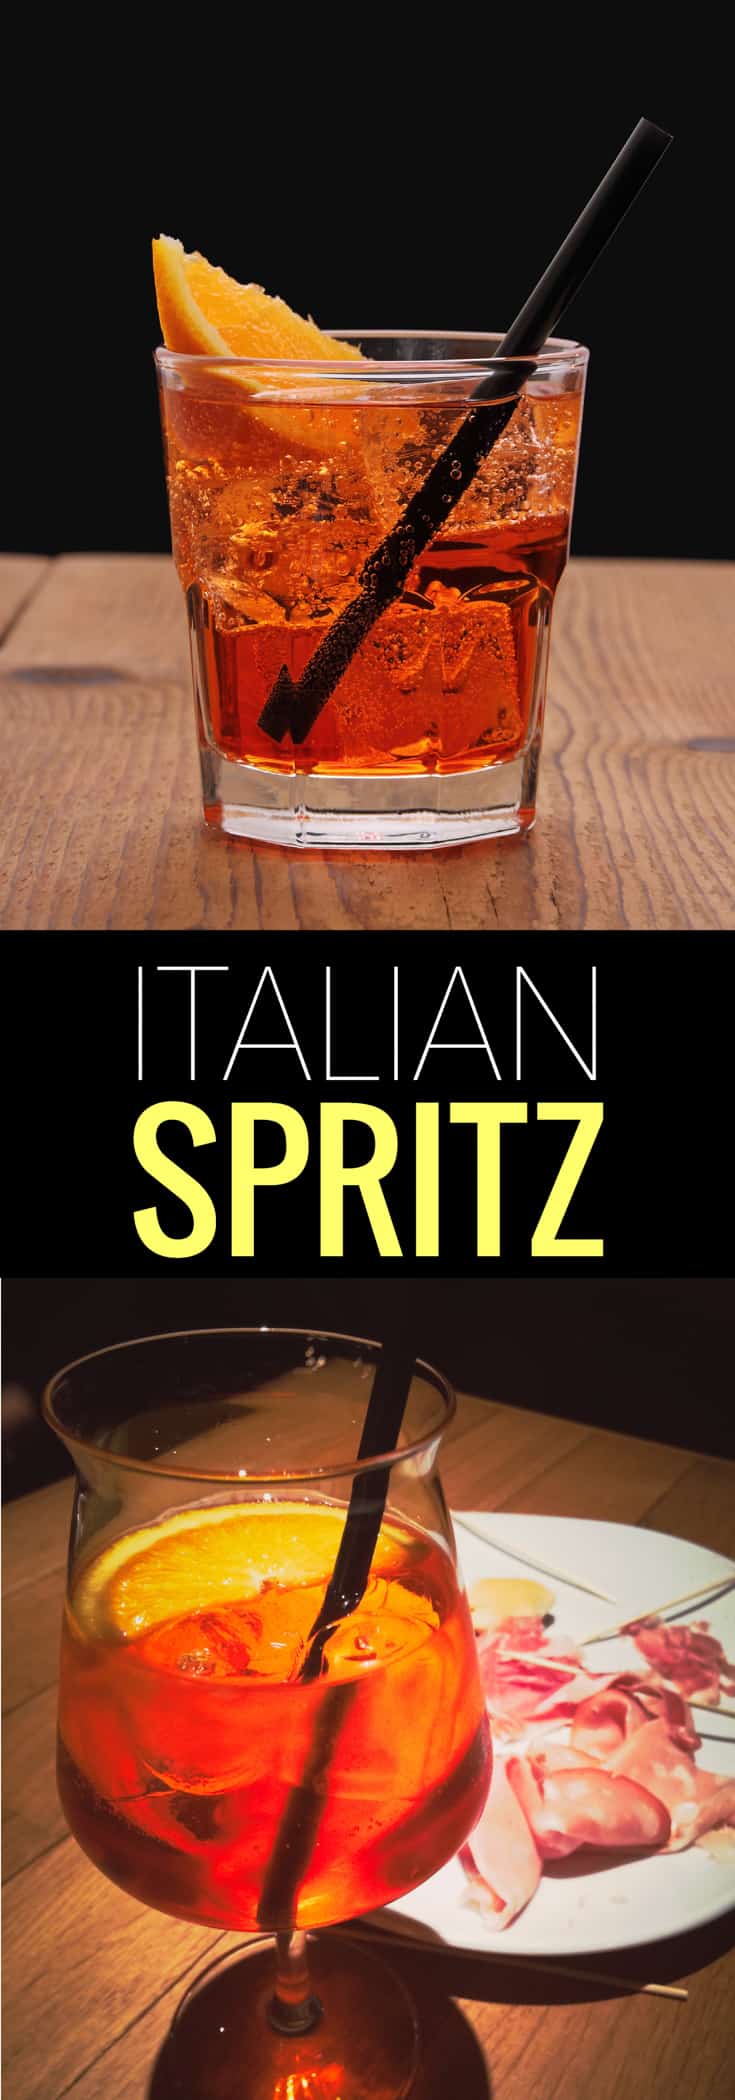 The most popular drink in Italy is the Spritz cocktail, find out why it's so popular and how to make one.